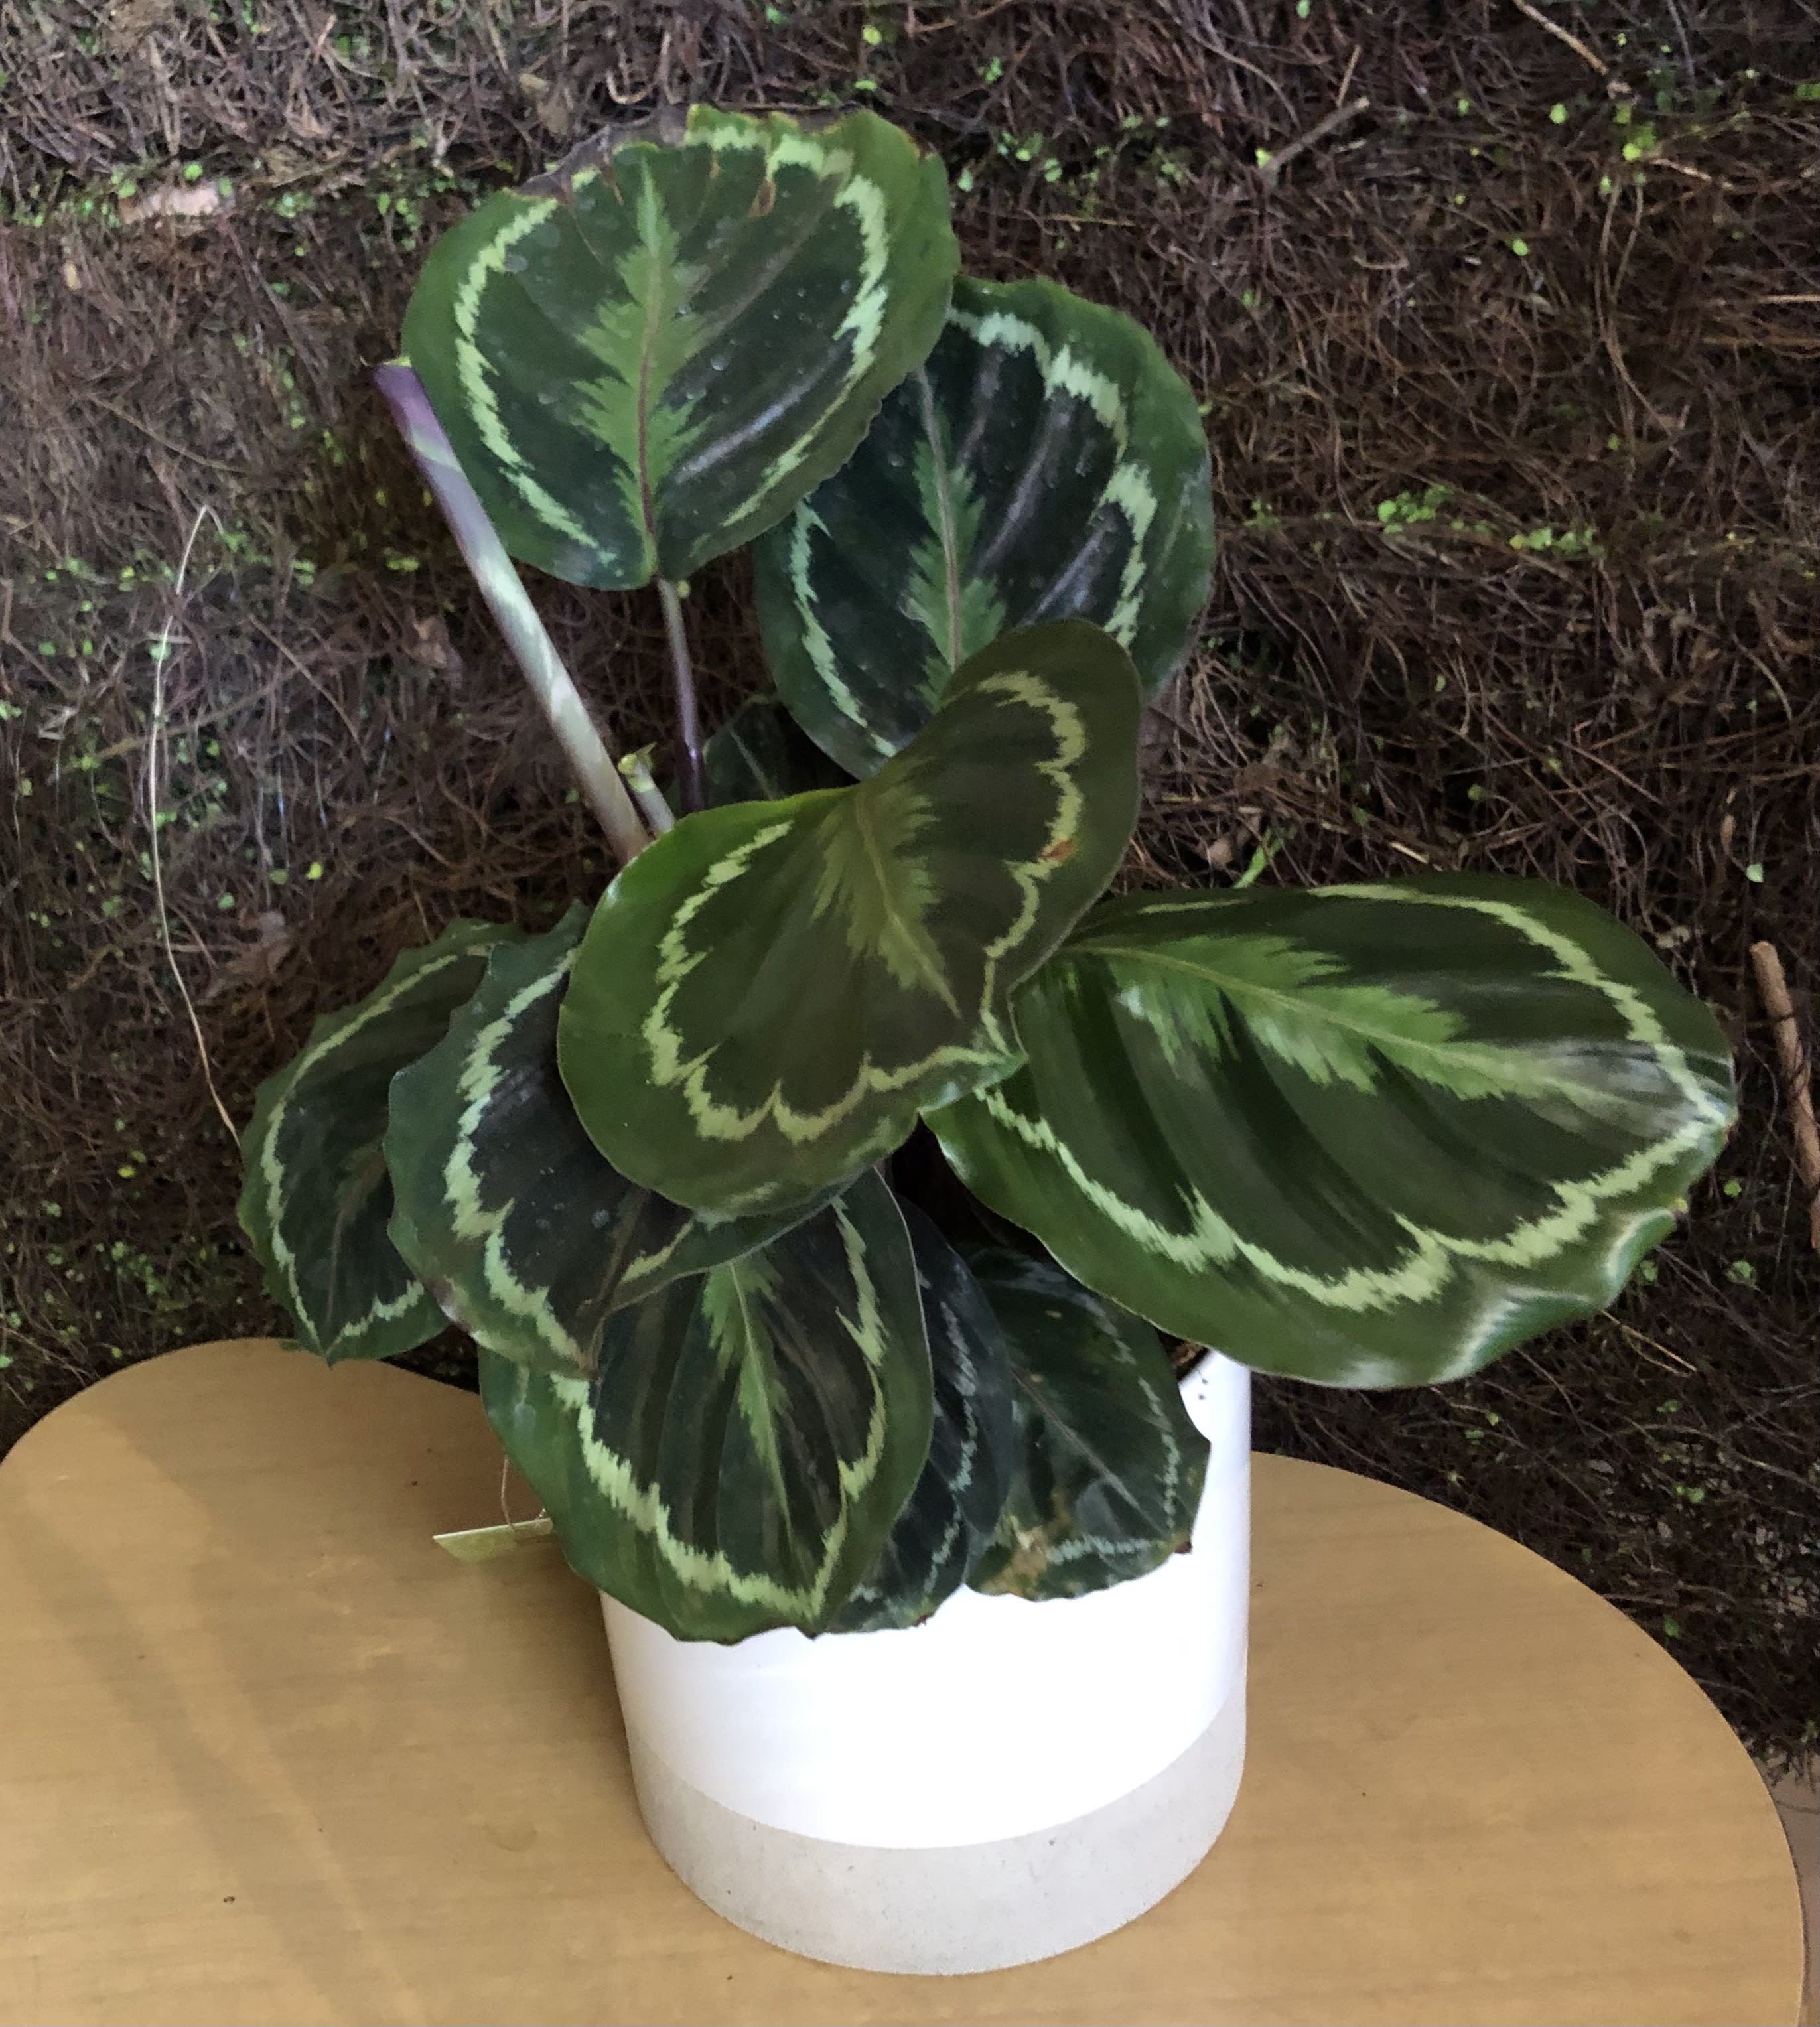 Calathia Plant #SD7 - House Plant Called Calathia plant in ceramic Low Maintenance Easy to take care of  But beatiful